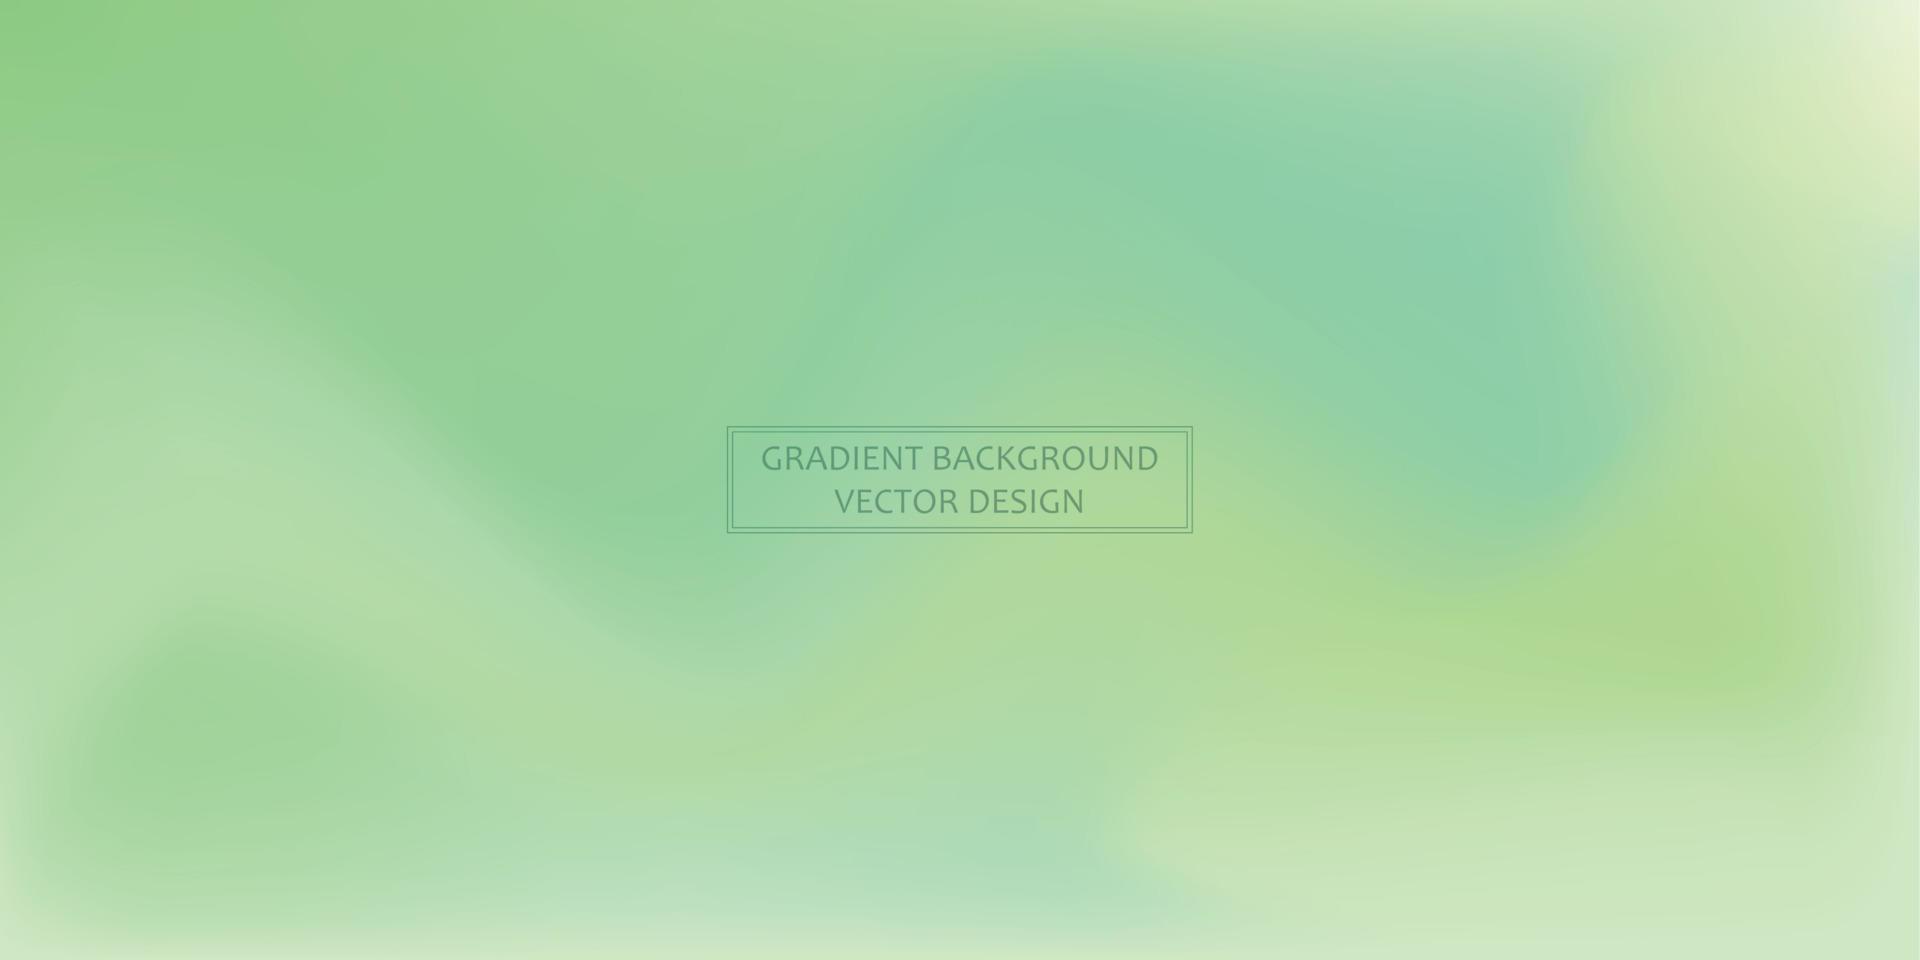 Panoramic web template multicolor gradient background, stylish design element - Vector